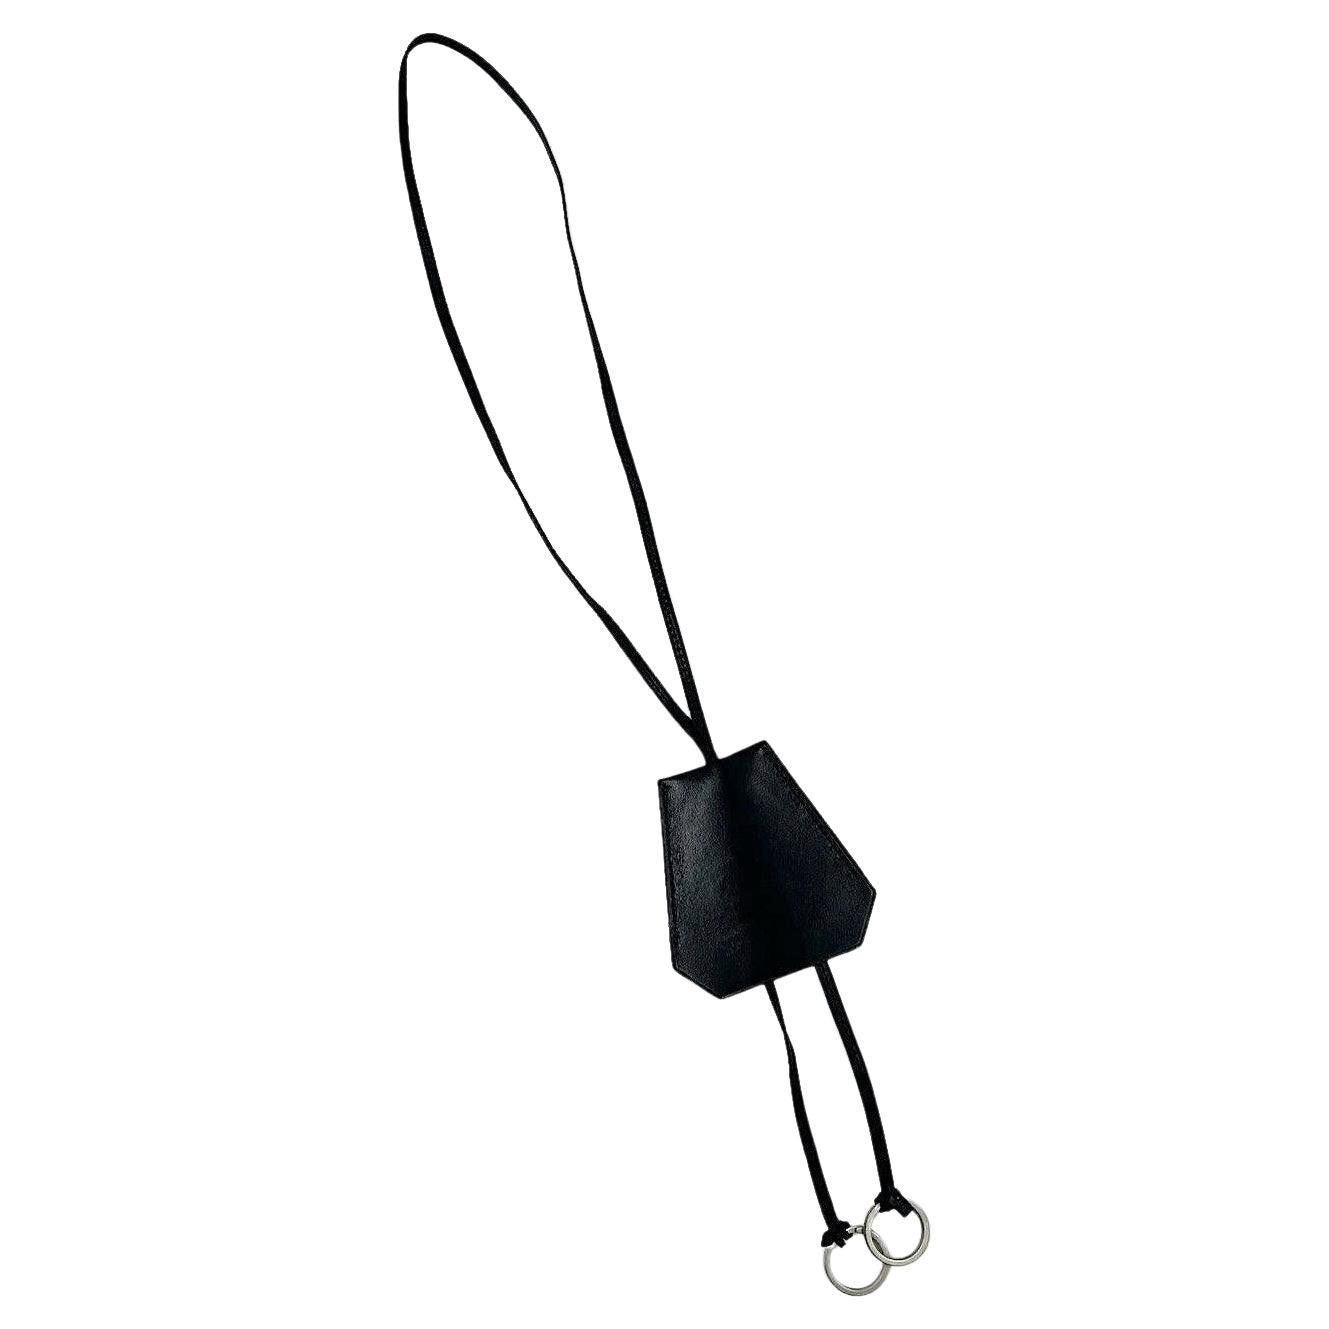 HERMES "Le Touquet" Key Holder in Black Leather at 1stDibs